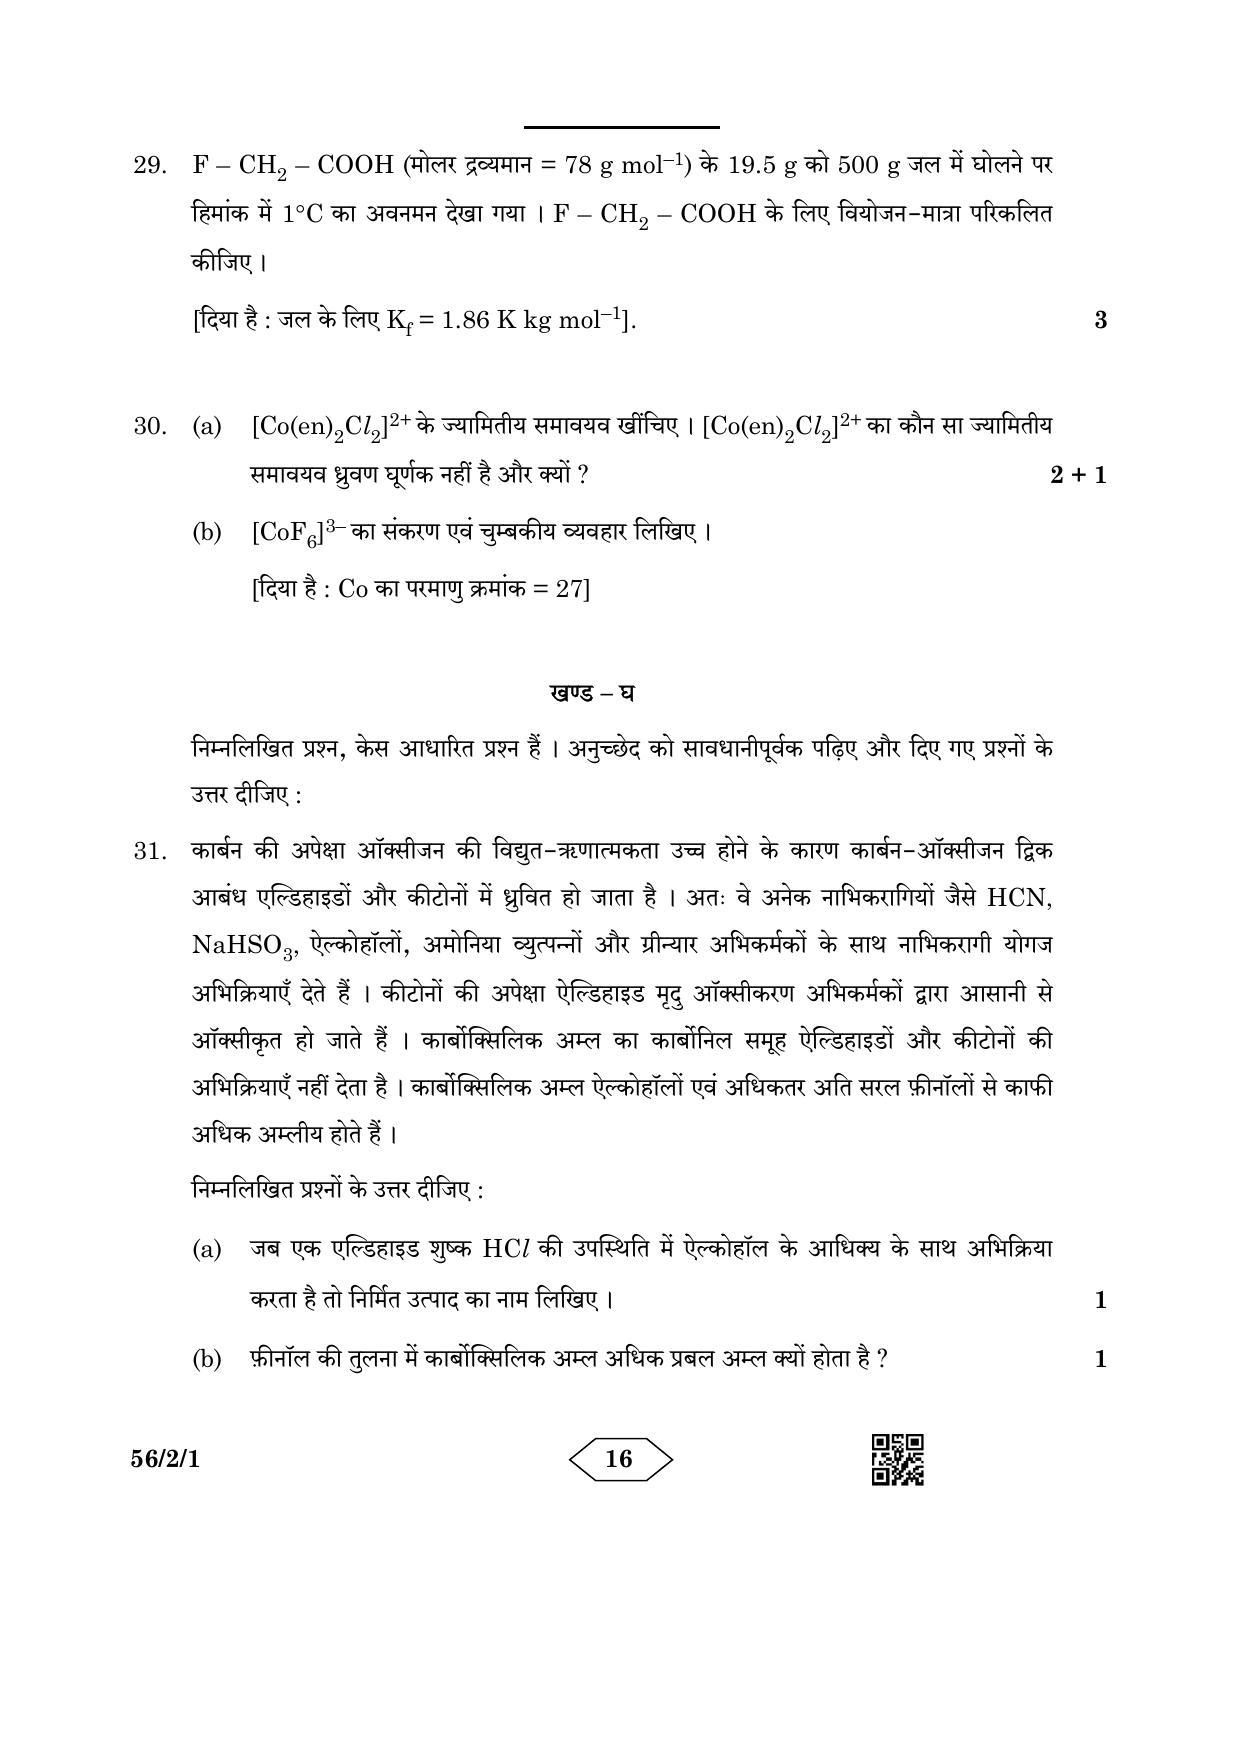 CBSE Class 12 56-2-1 Chemistry 2023 Question Paper - Page 16